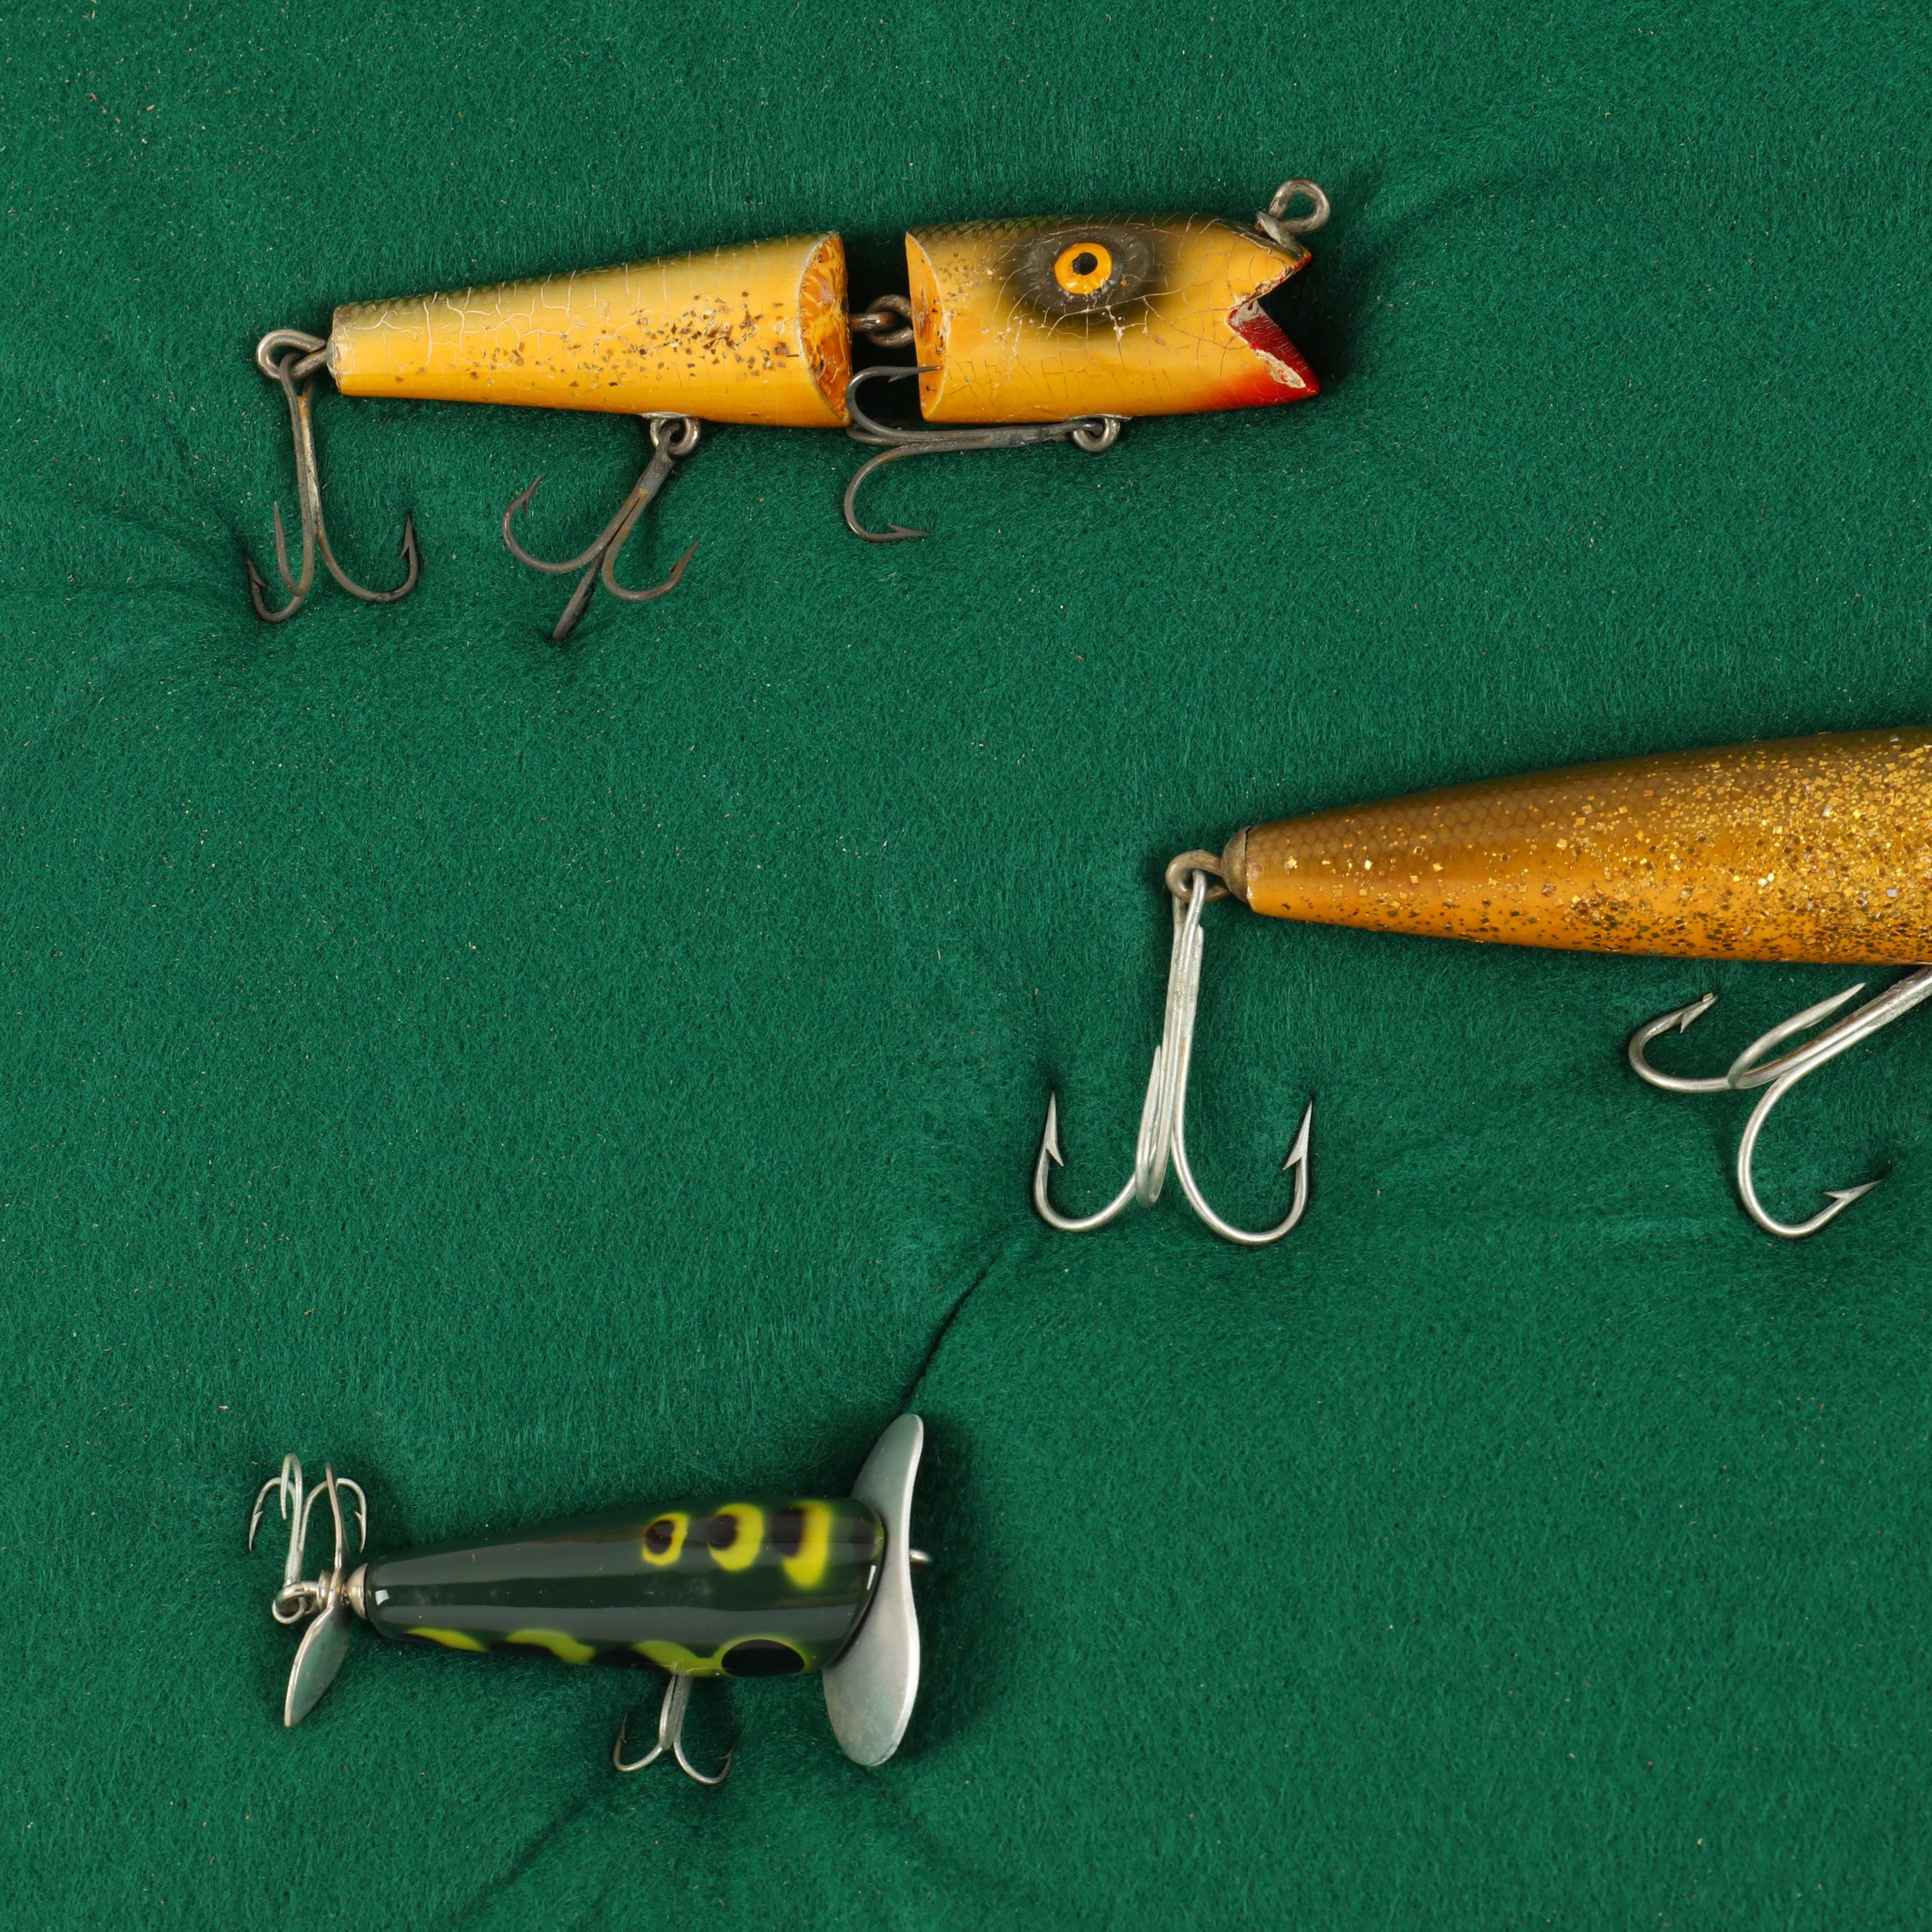 Shadow Box With 3 Vintage Fishing Lures